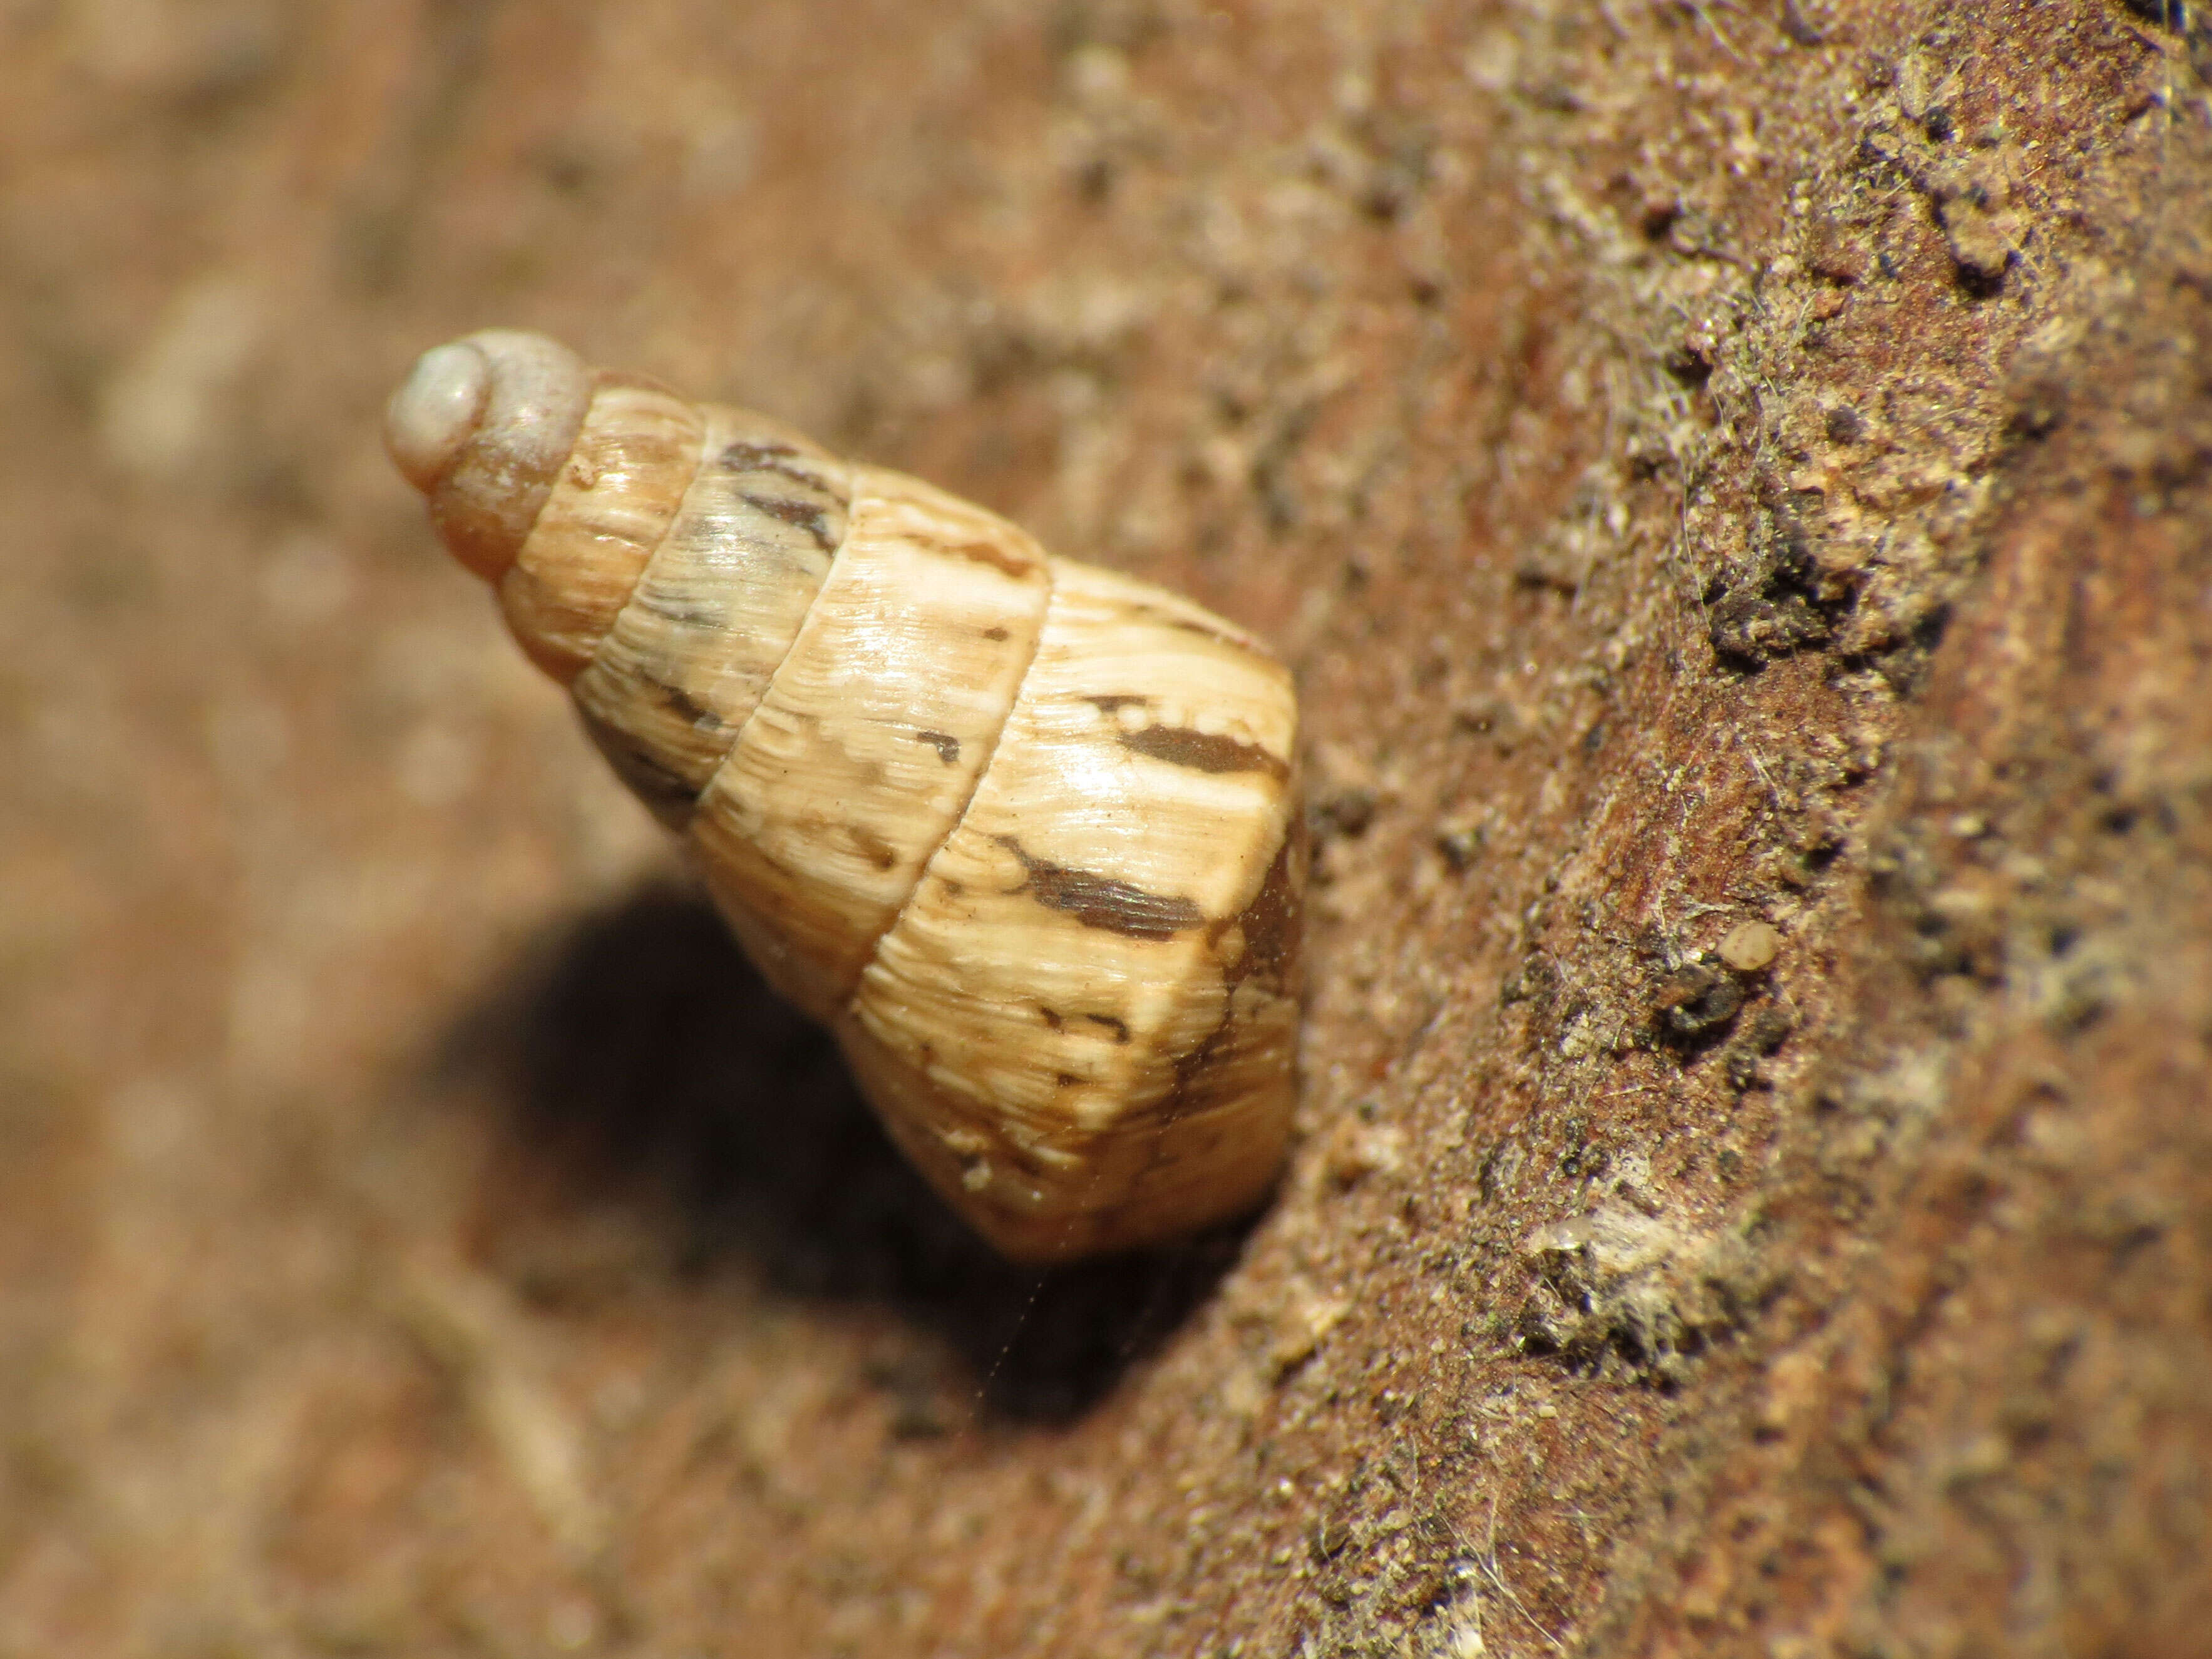 Image of Pointed snail